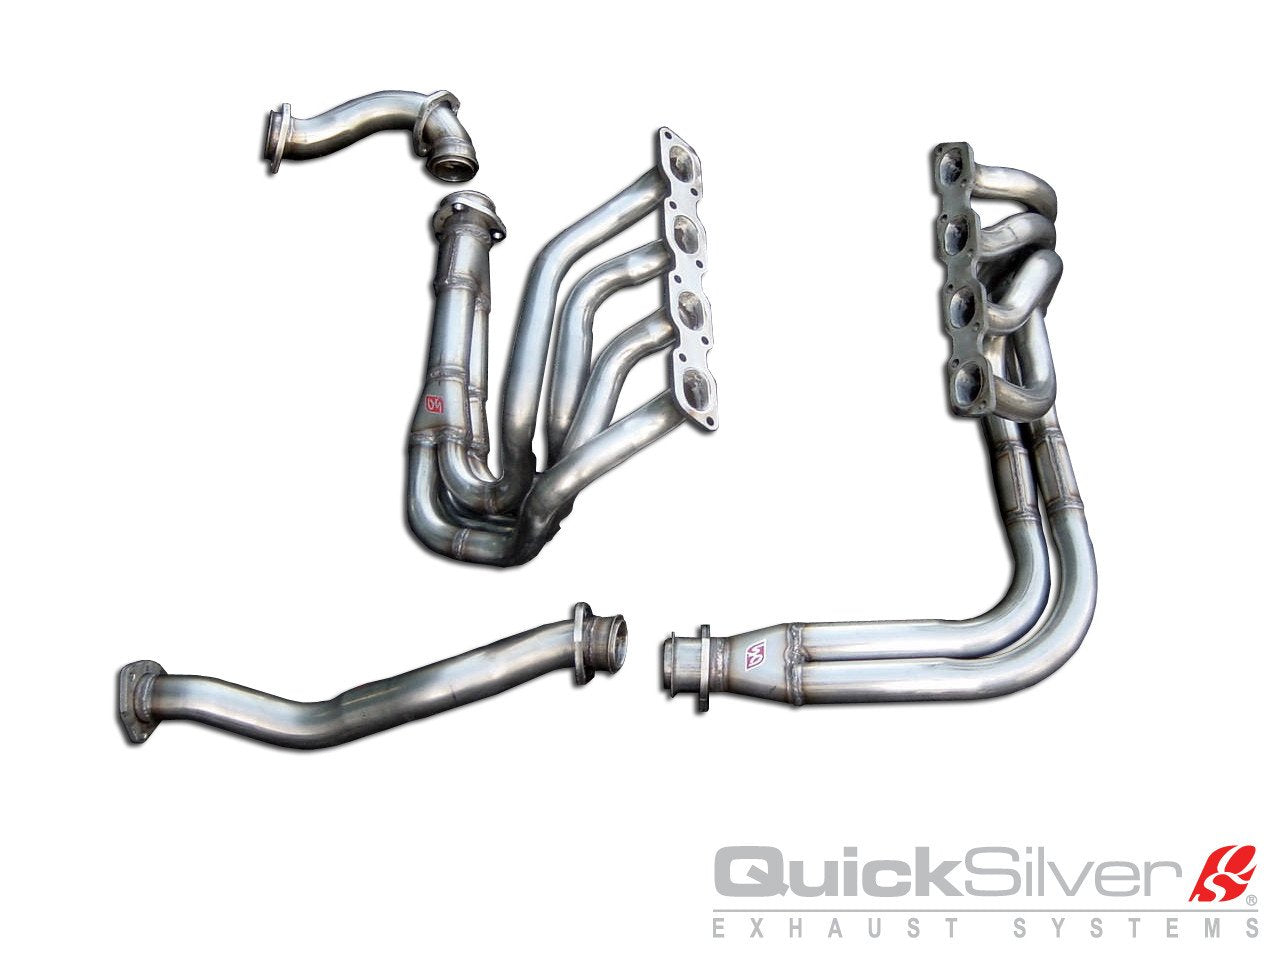 Ferrari Mondial QV and 3.2 -Stainless Steel Manifolds and Pipes (1983-89)